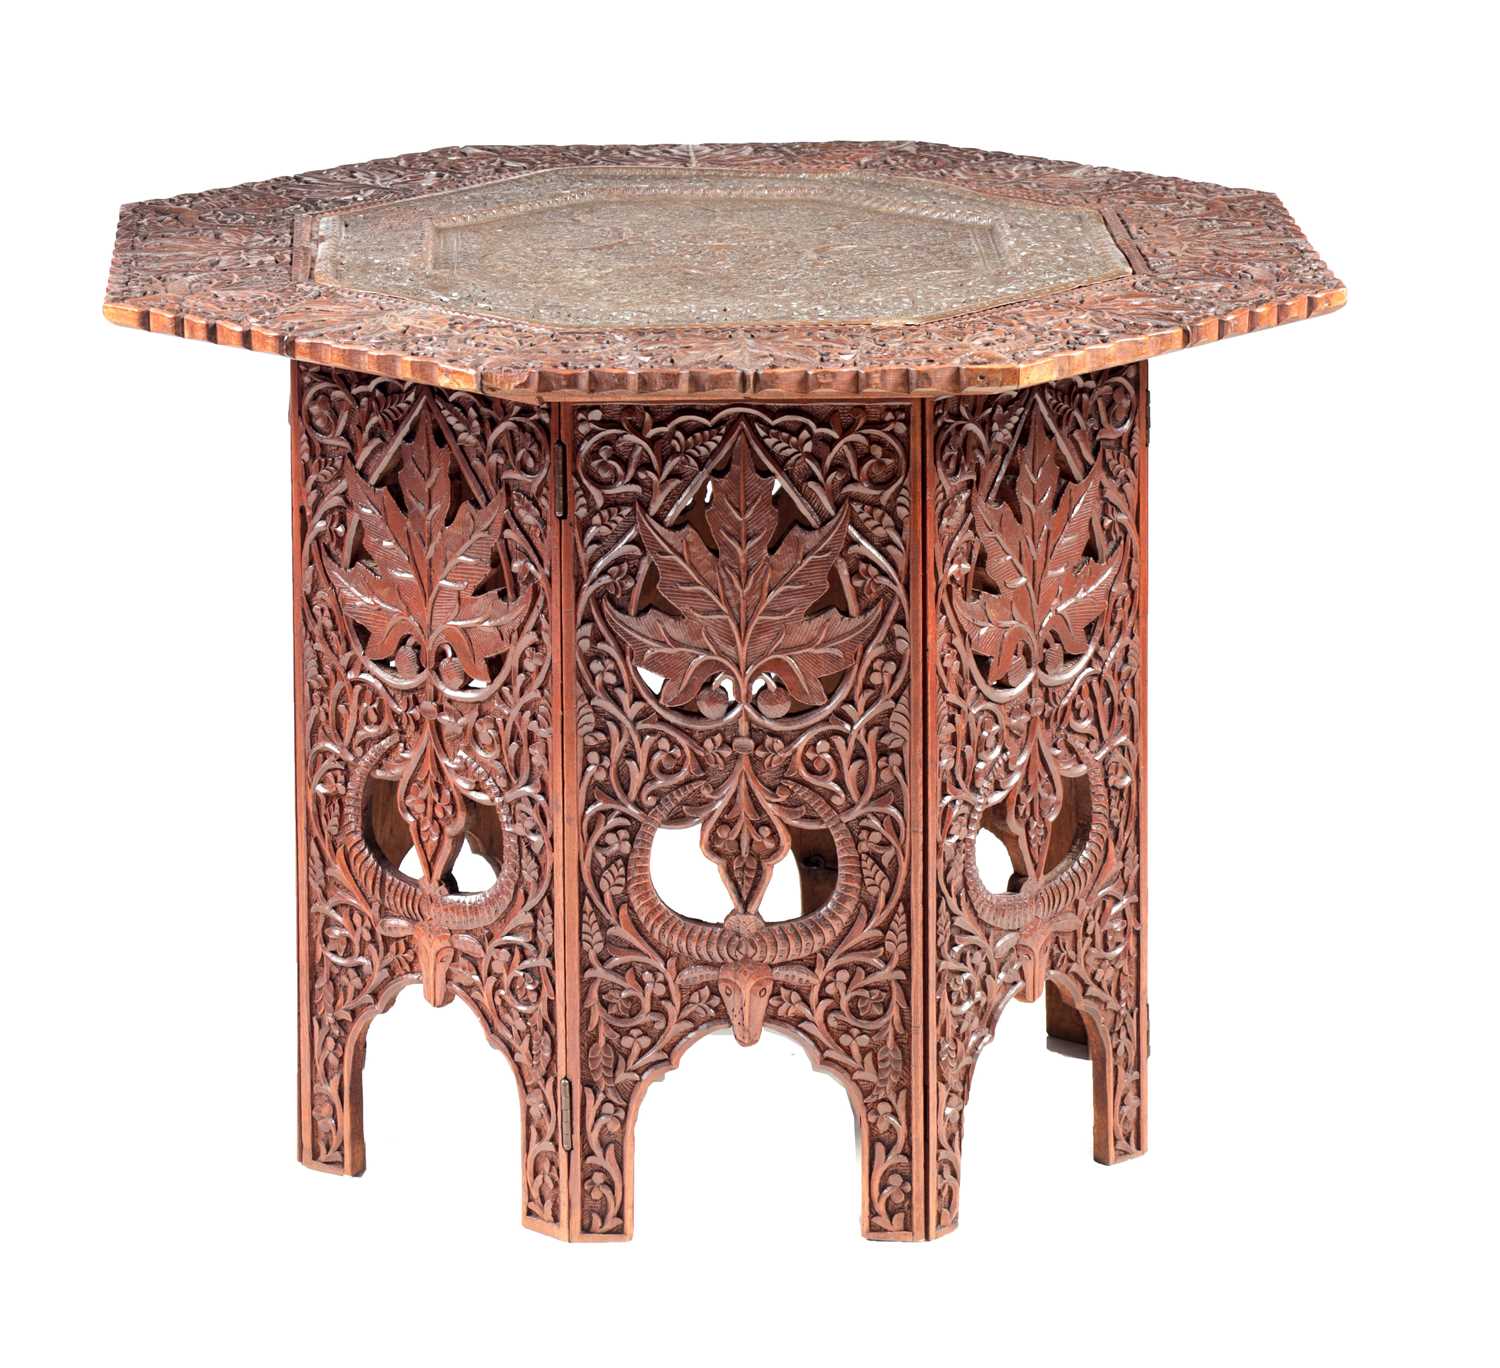 Lot 74 - A FINELY CARVED AND PIERCED OCTAGONAL INDIAN HARDWOOD TABLE